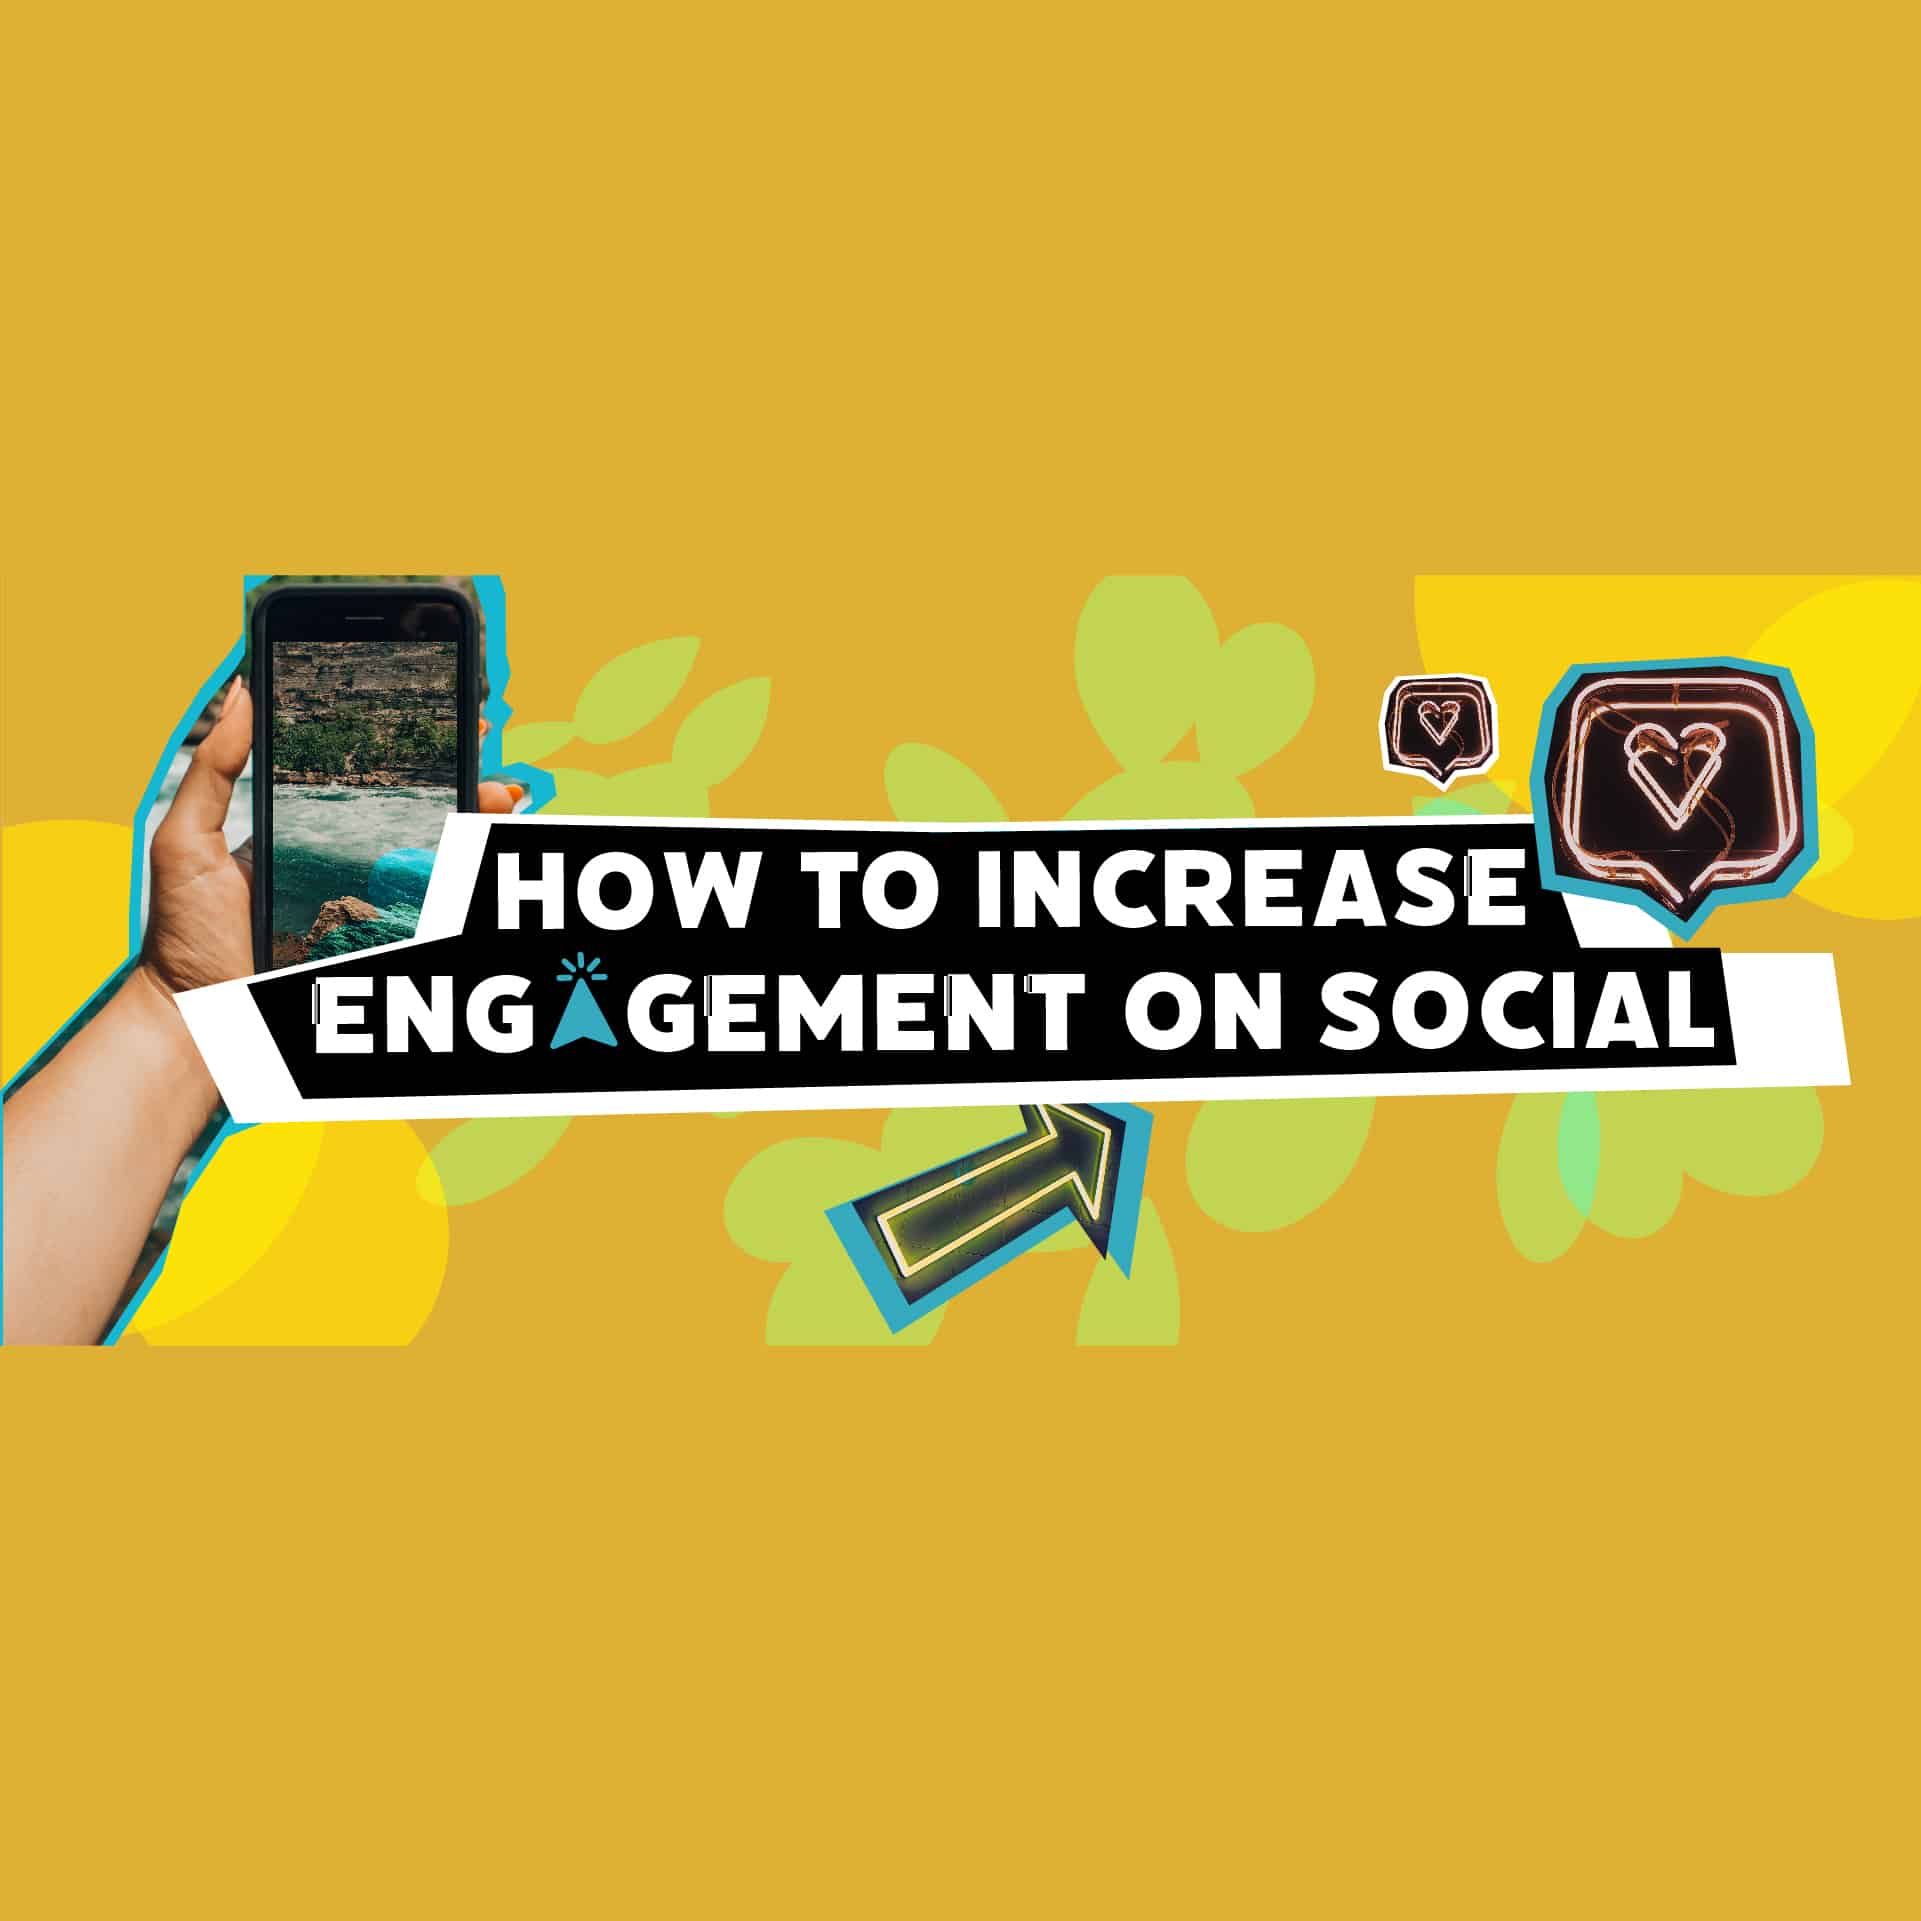 How to Increase Engagement on Social